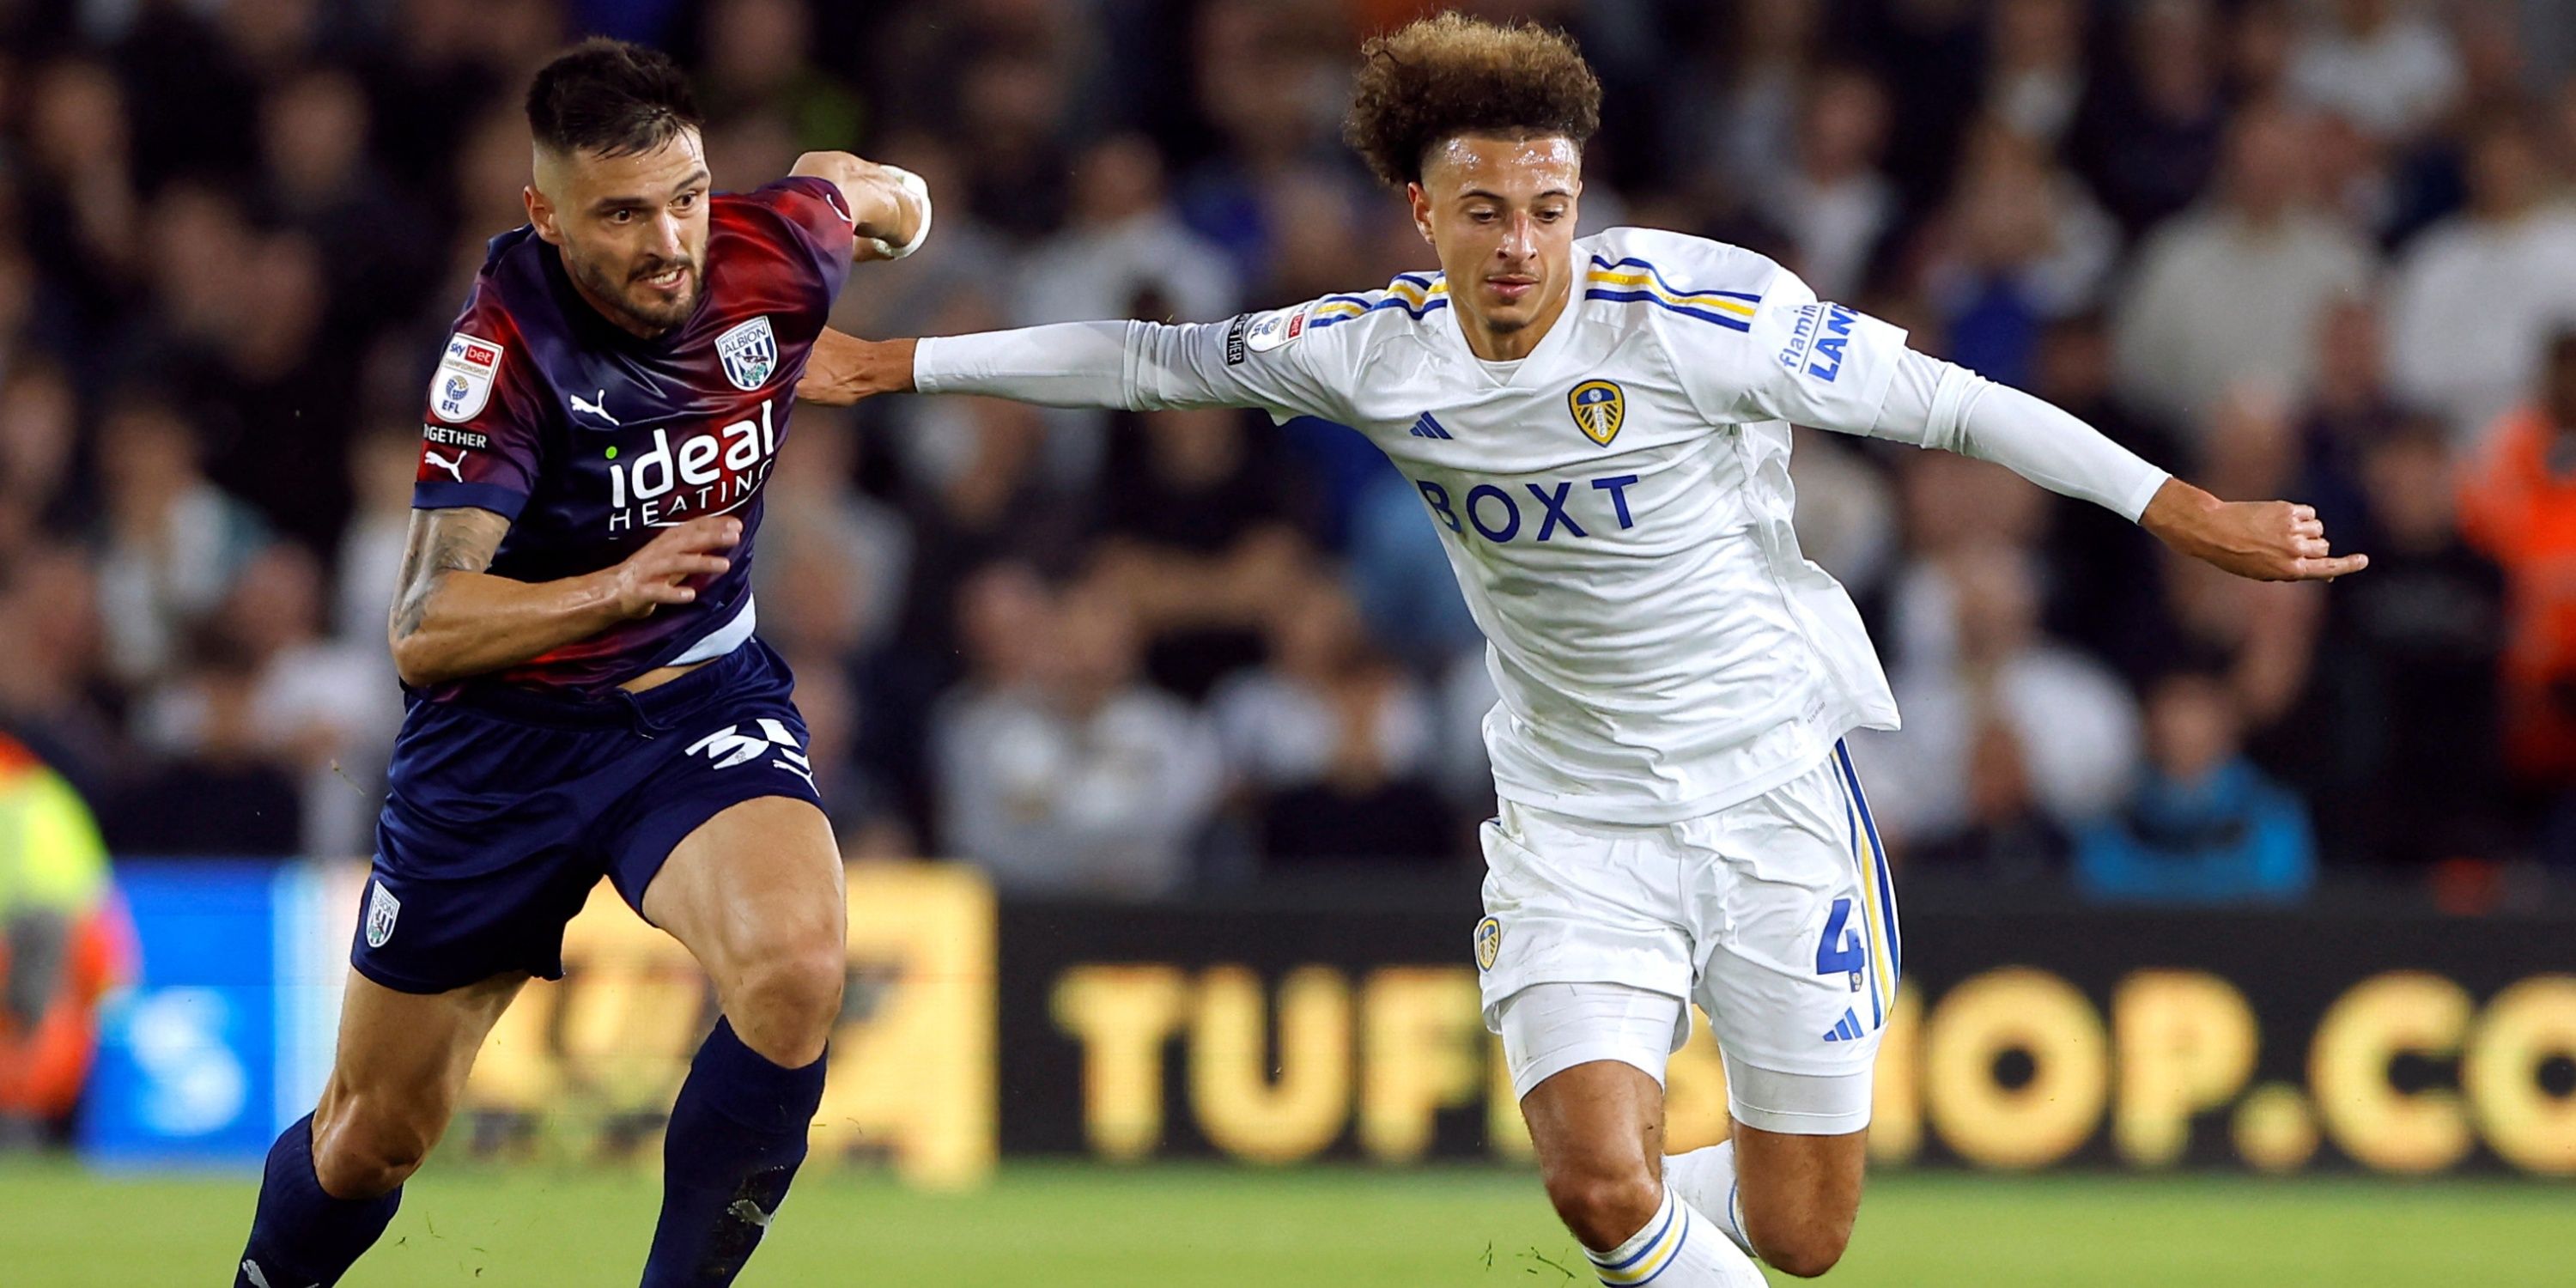 West Bromwich Albion's Okay Yokuslu in action with Leeds United's Ethan Ampadu